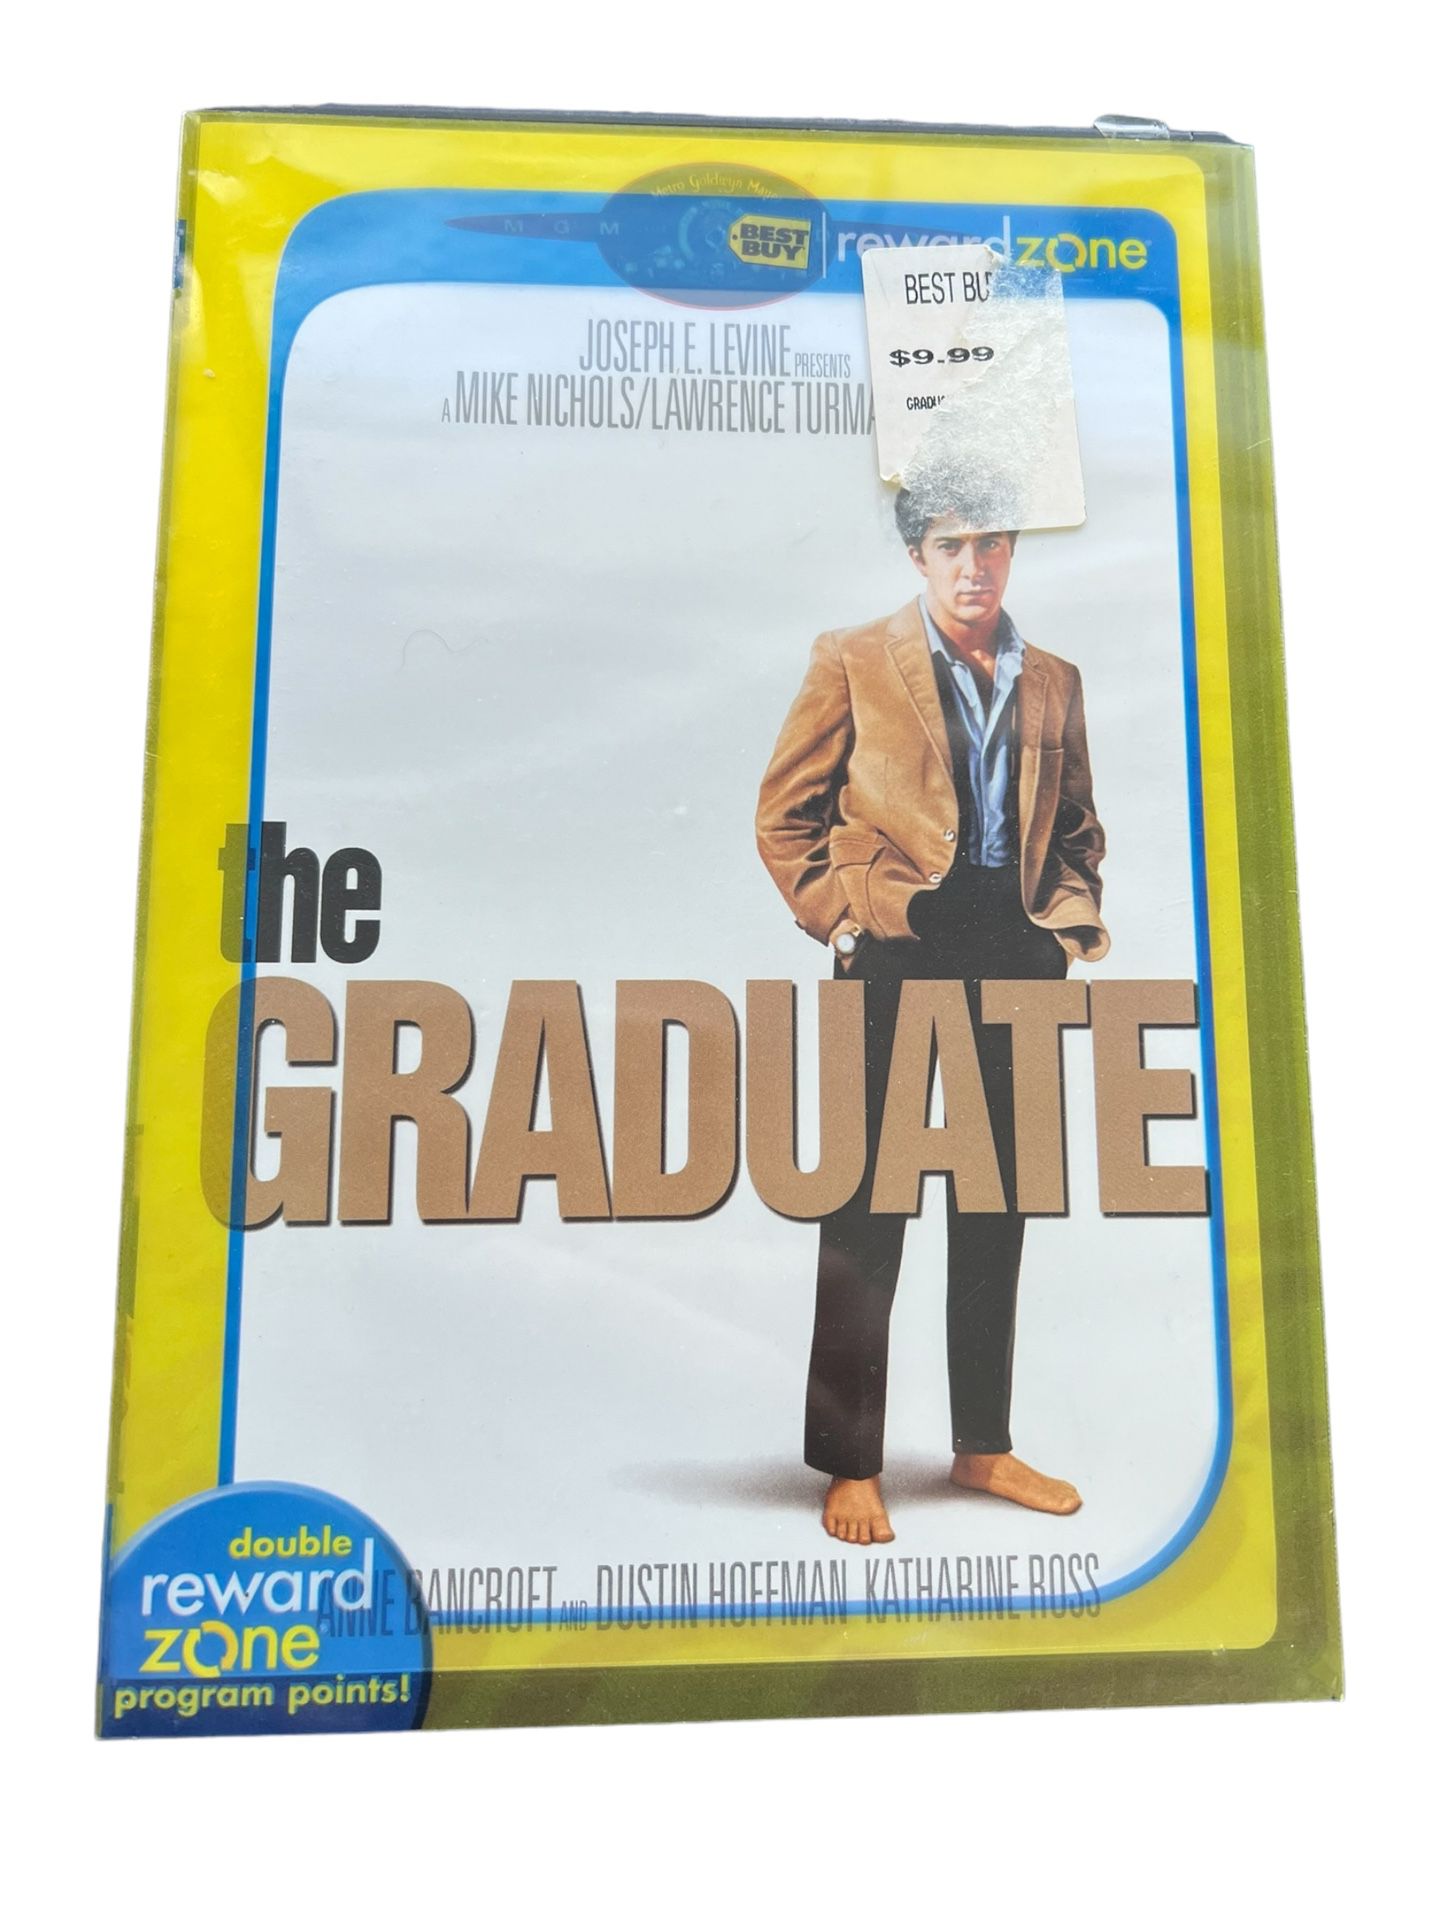 The Graduate (DVD, 1967) Dustin Hoffman. Anne Bancroft  The Graduate (DVD, 1967) Dustin Hoffman. Anne Bancroft  This DVD features the iconic 1967 film